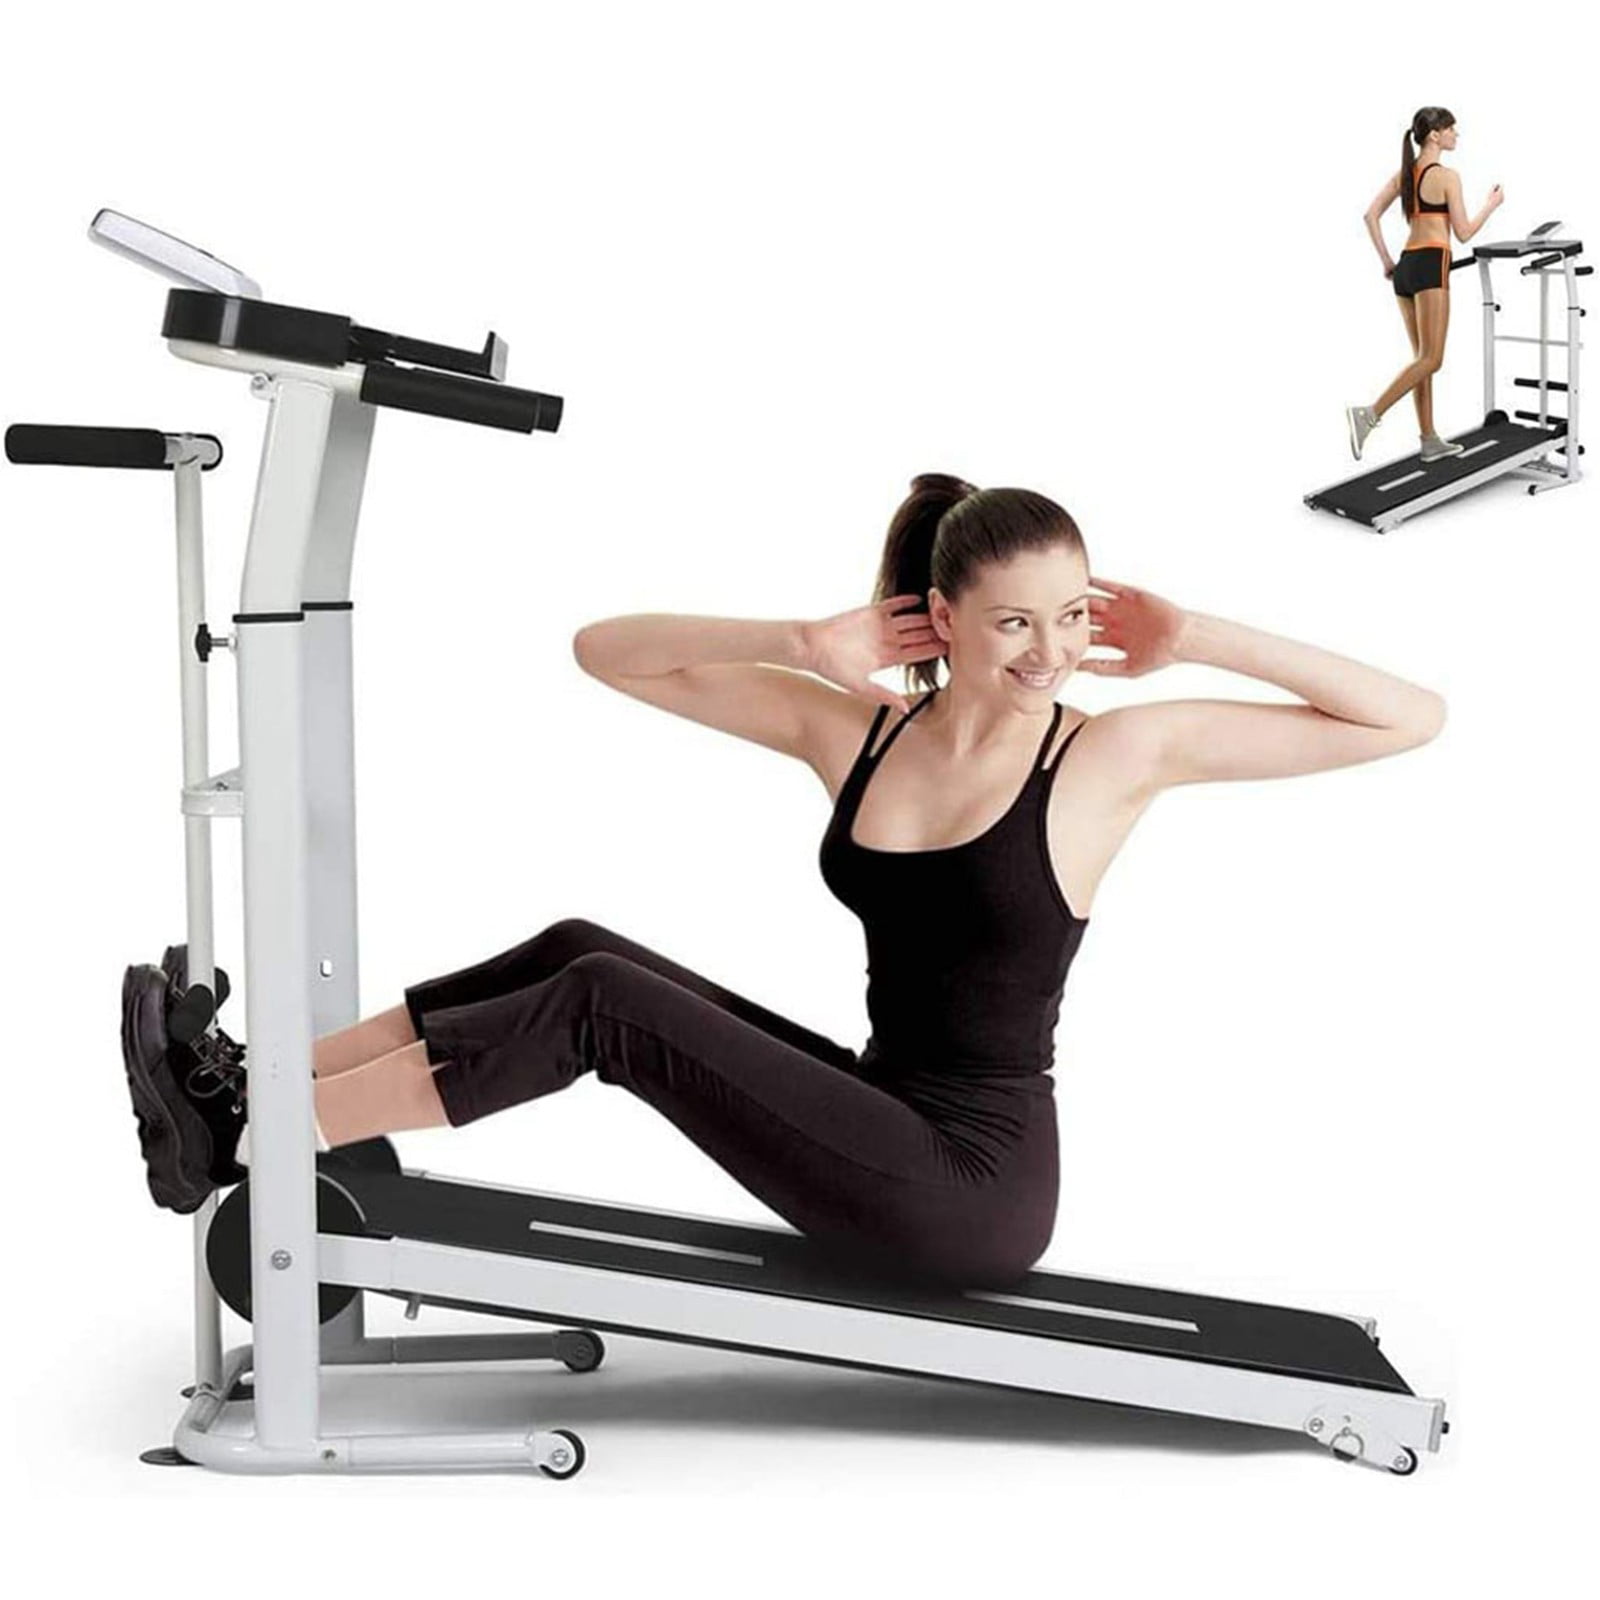 Folding Manual Treadmill Workout Machine Cardio Fitness Exercise Incline Home 